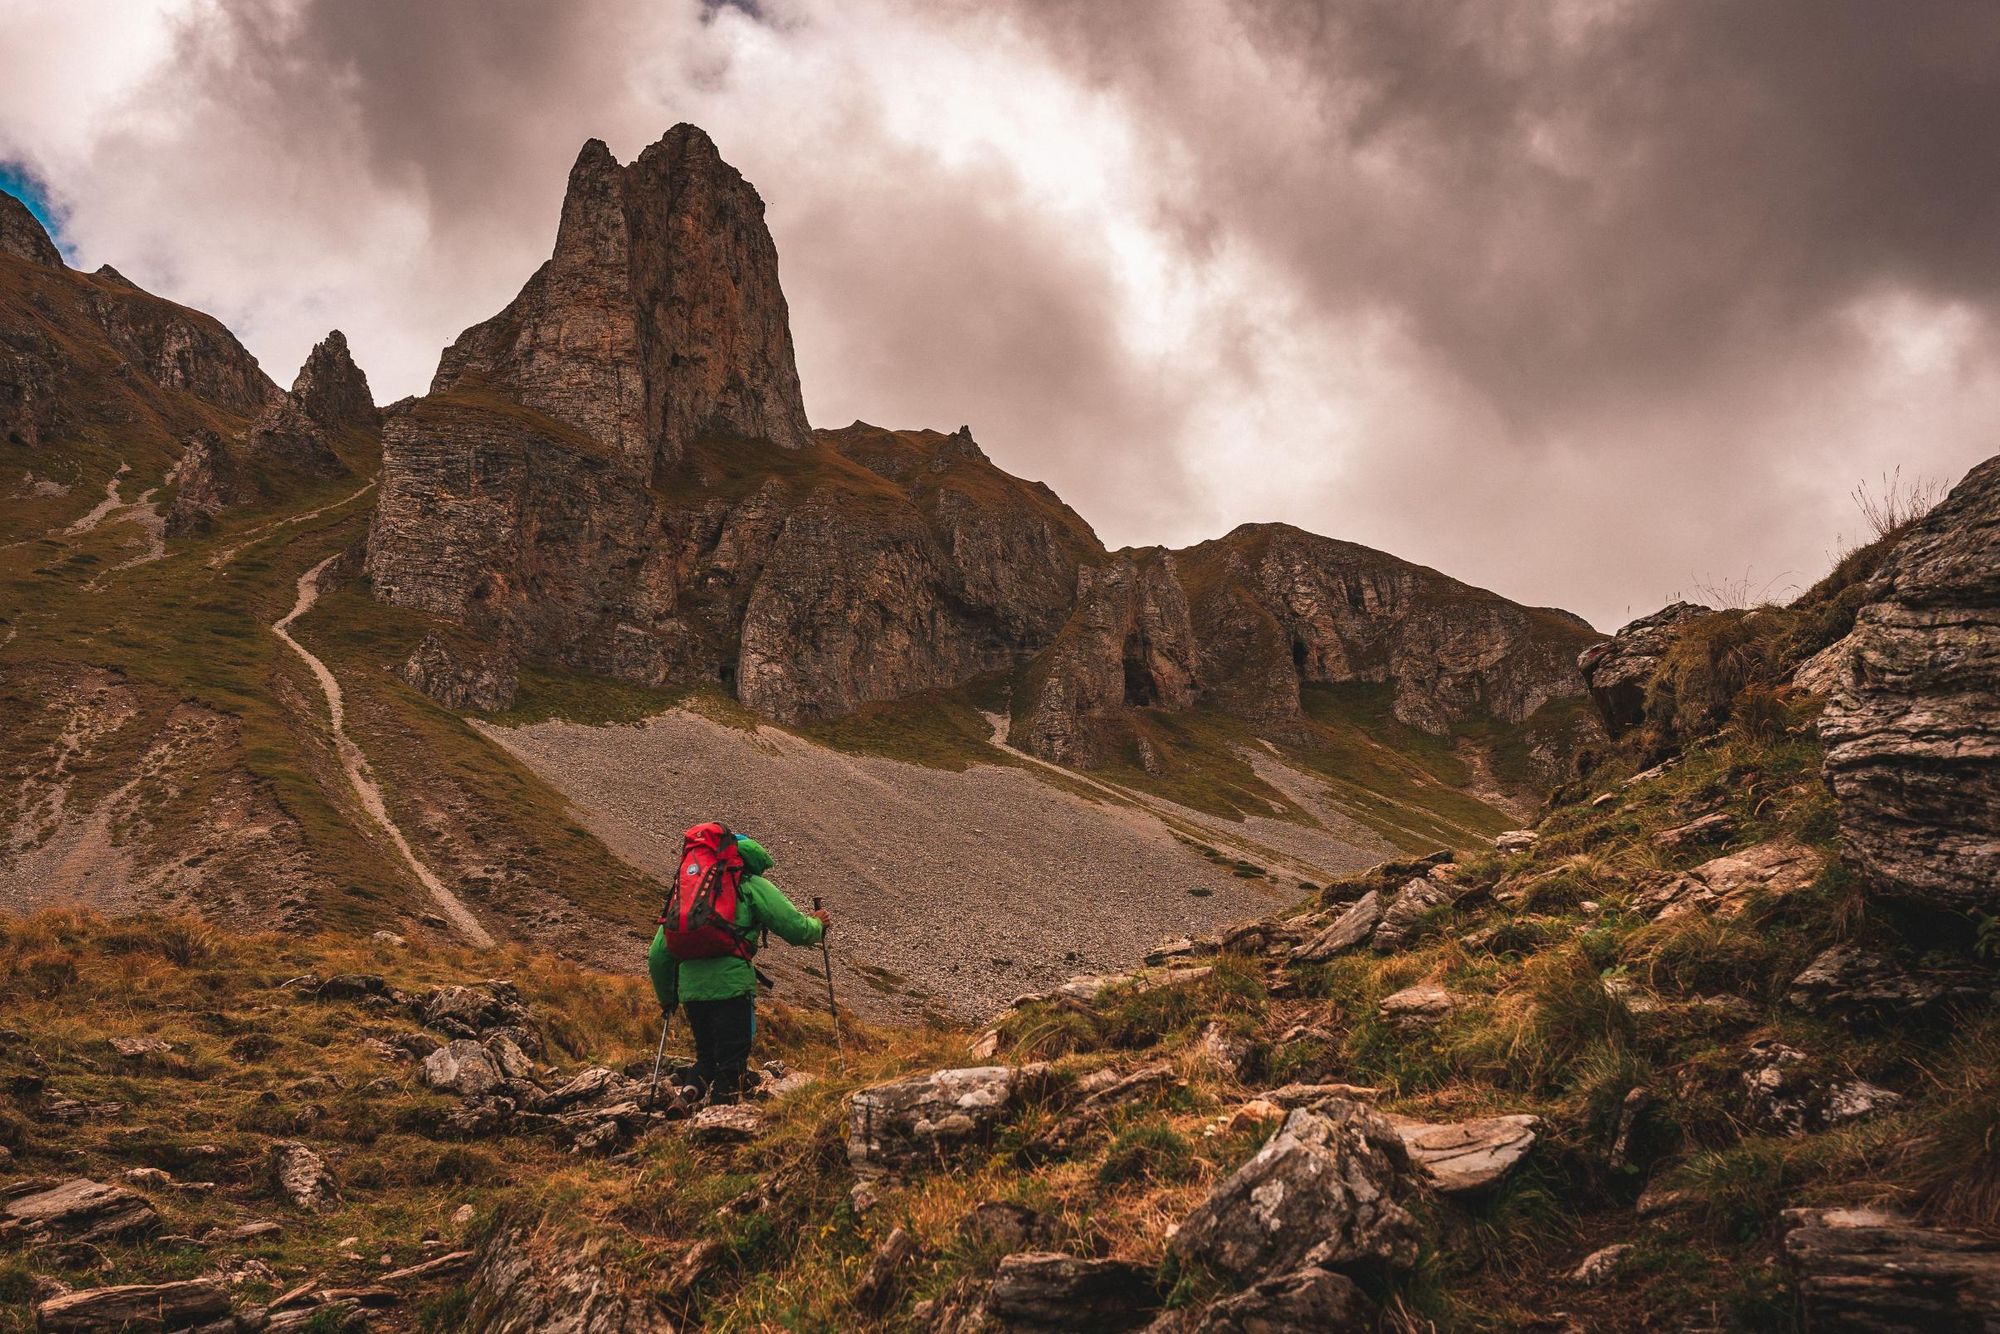 A hiker in the Sharr Mountains of North Macedonia. Photo: Butterfly Outdoor Adventure